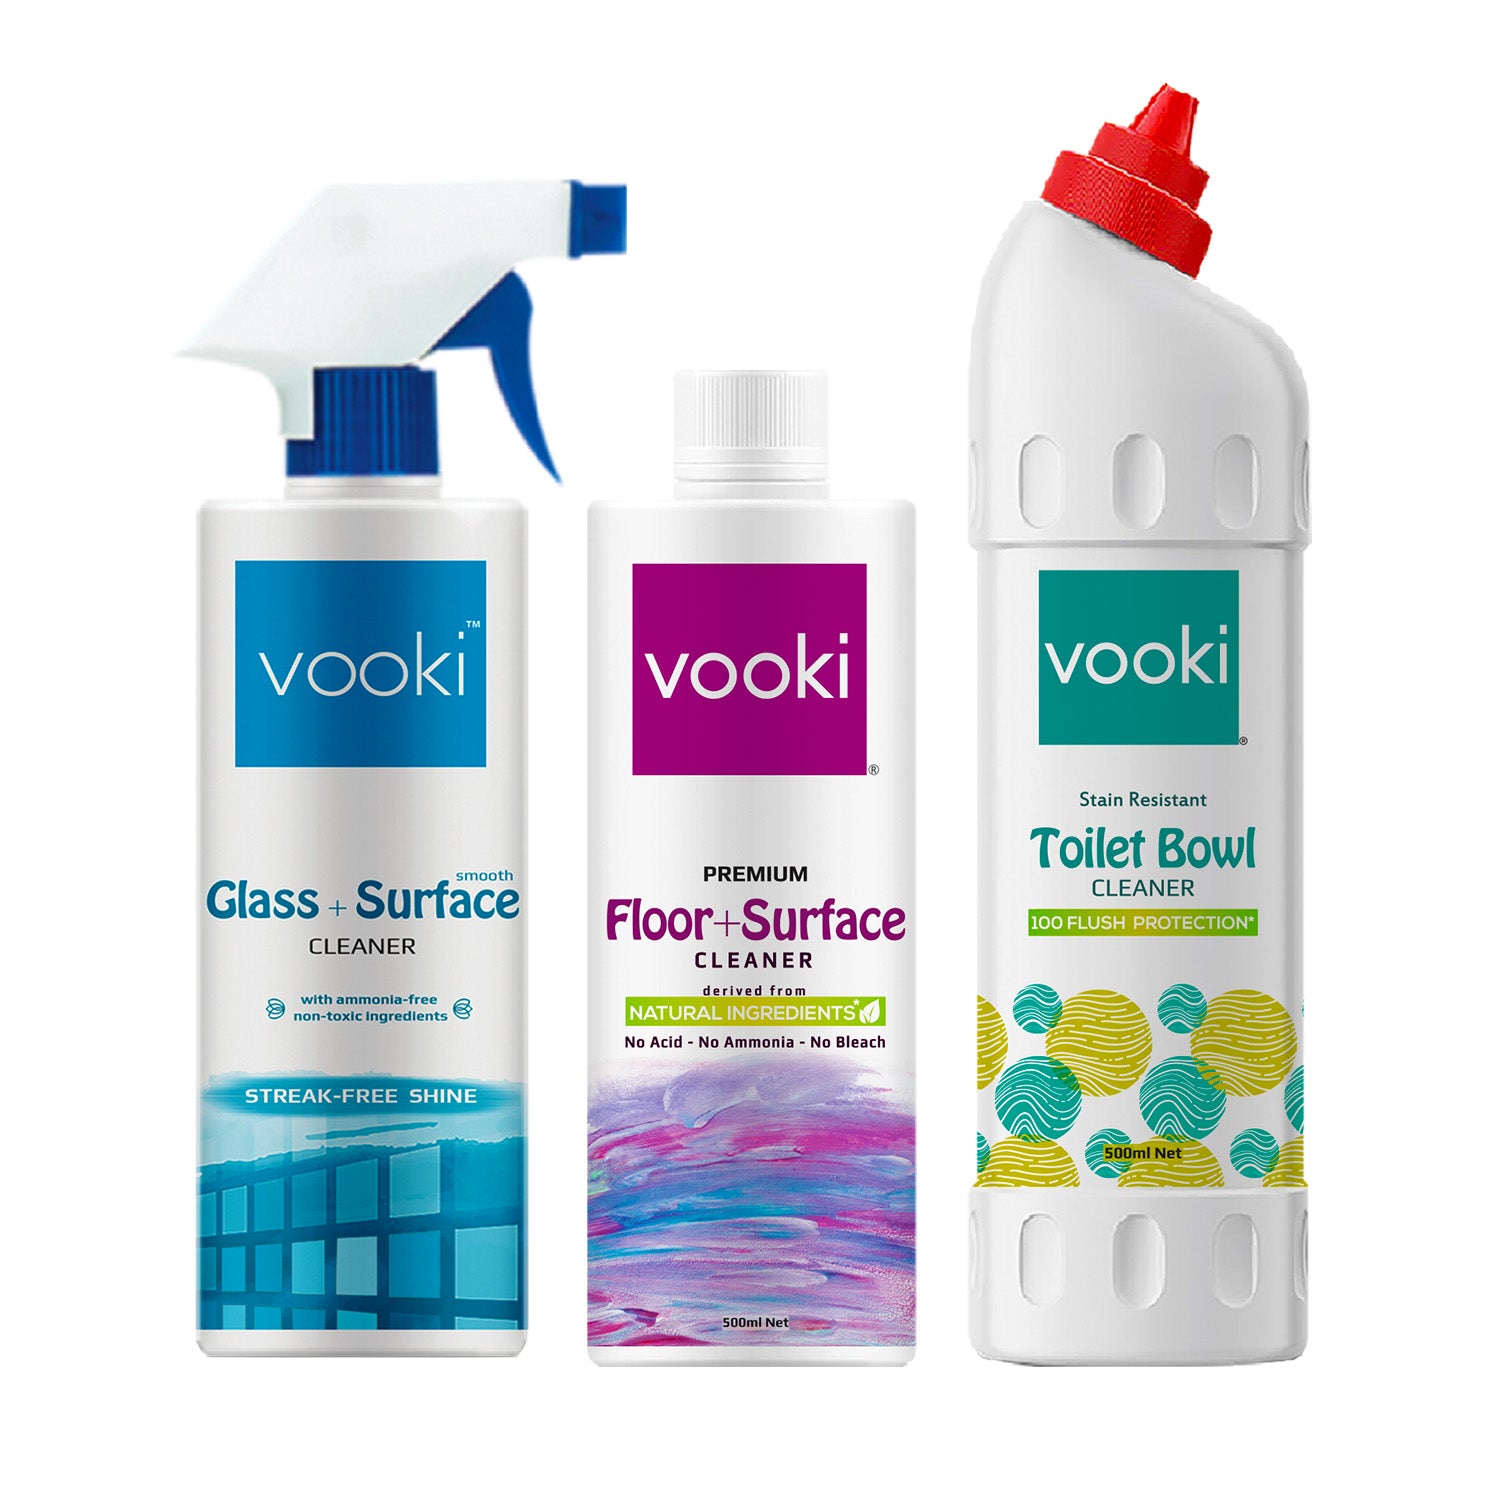 vooki floor cleaning products: a range of effective cleaning solutions for all types of floors.